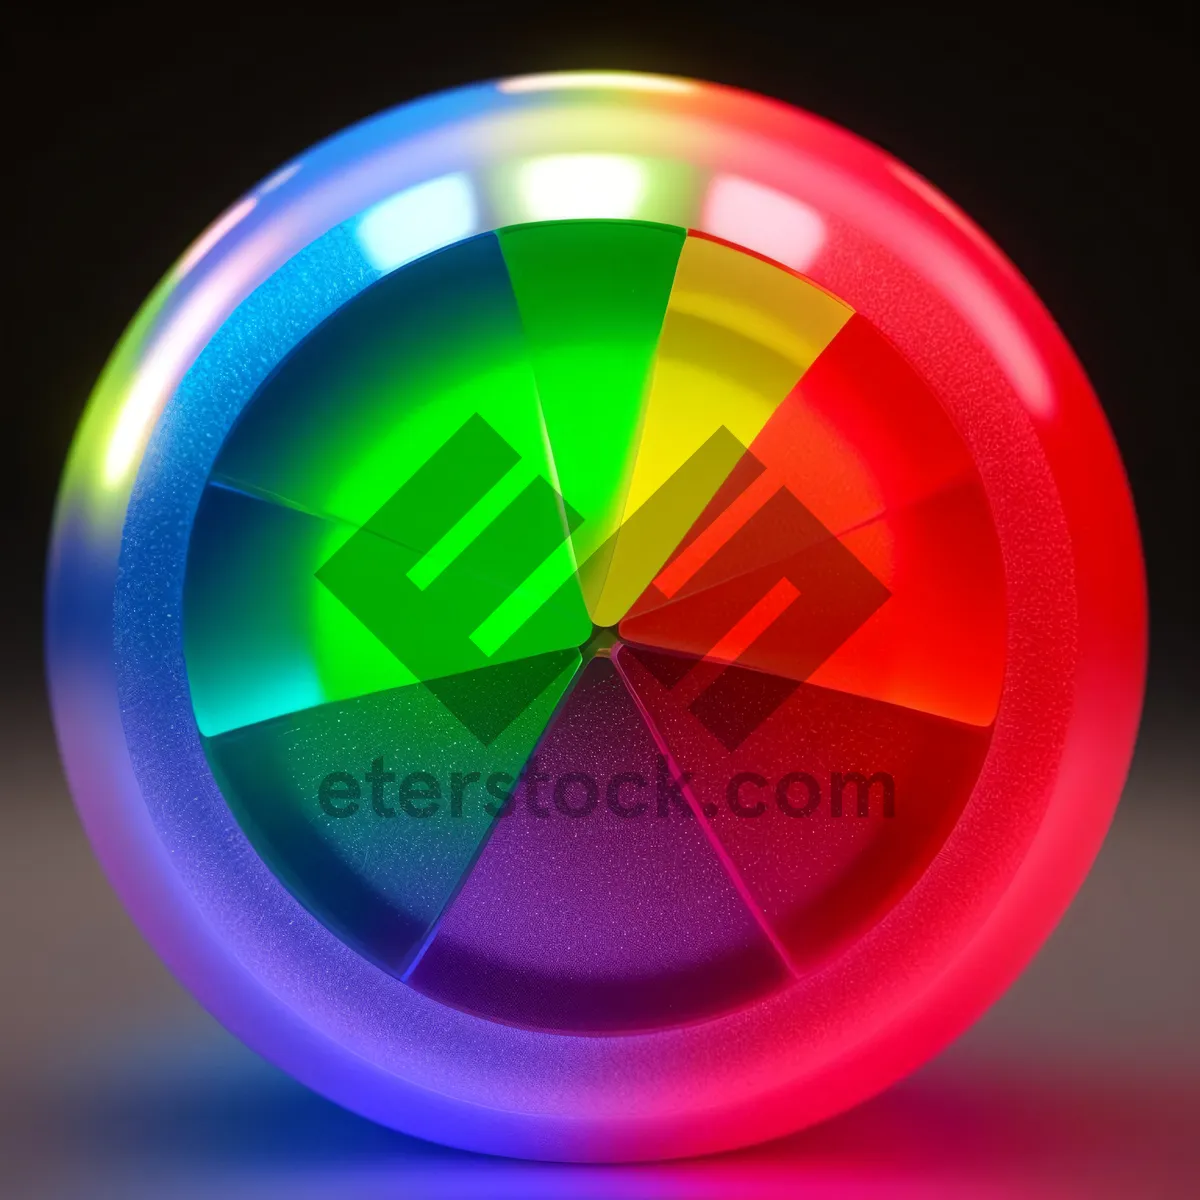 Picture of Shiny Round Web Buttons Set with Reflection on Black